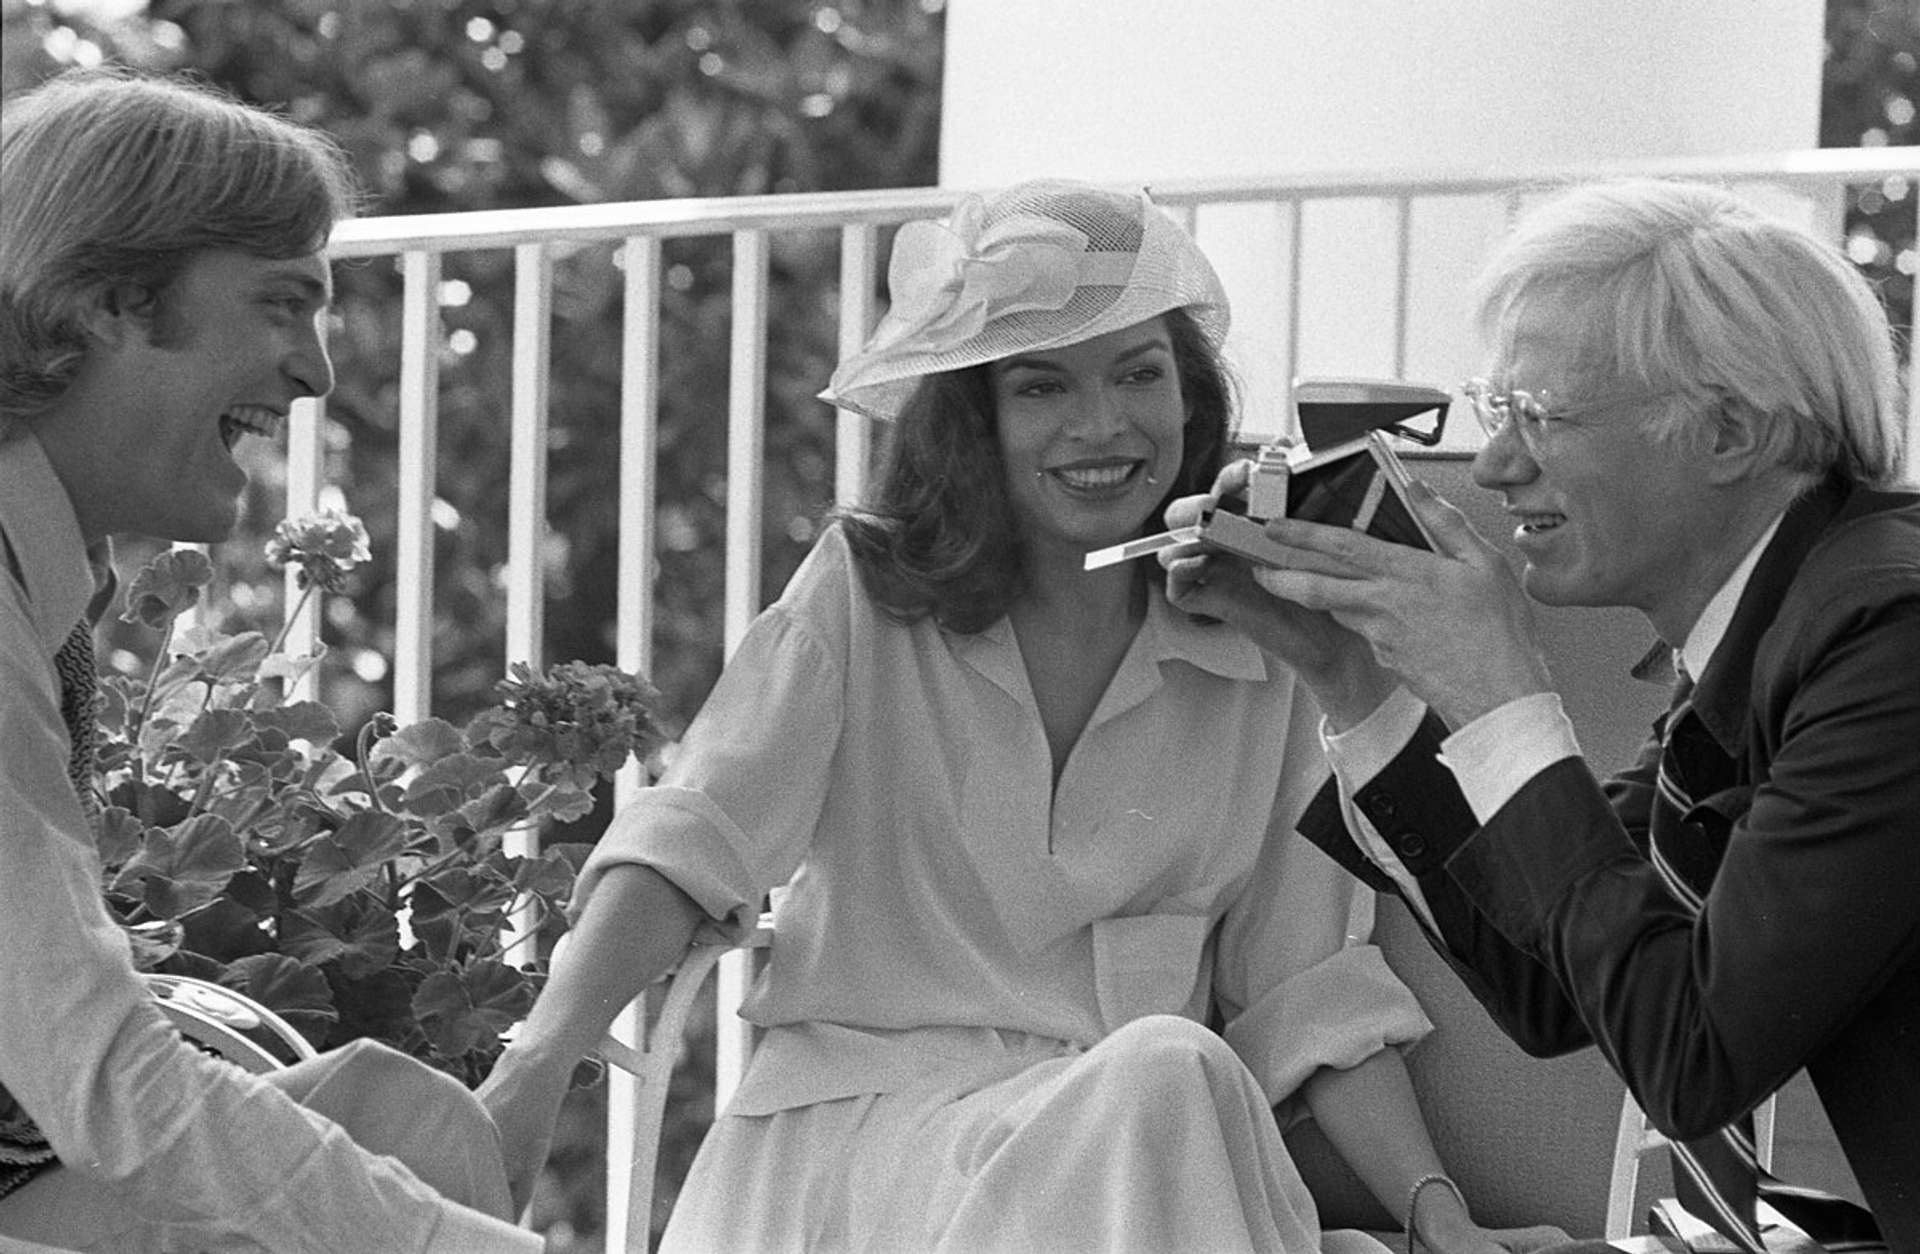 Photograph of Andy Warhol Taking a Polaroid Picture while Sitting with Jack Ford and Bianca Jagger on the Truman Balcony